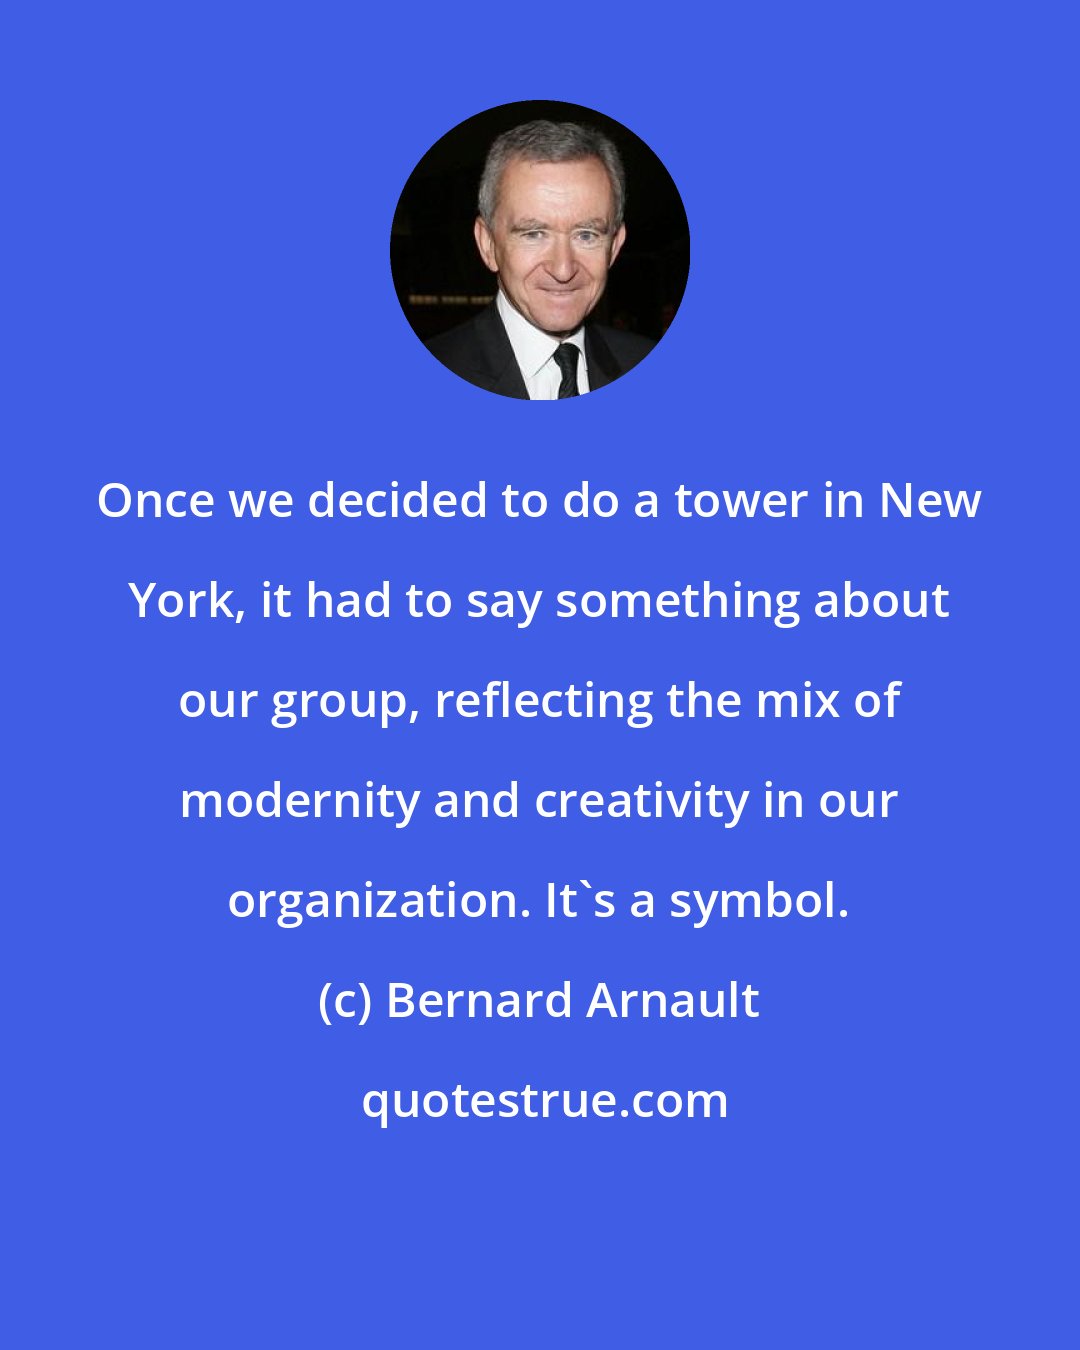 Bernard Arnault: Once we decided to do a tower in New York, it had to say something about our group, reflecting the mix of modernity and creativity in our organization. It's a symbol.